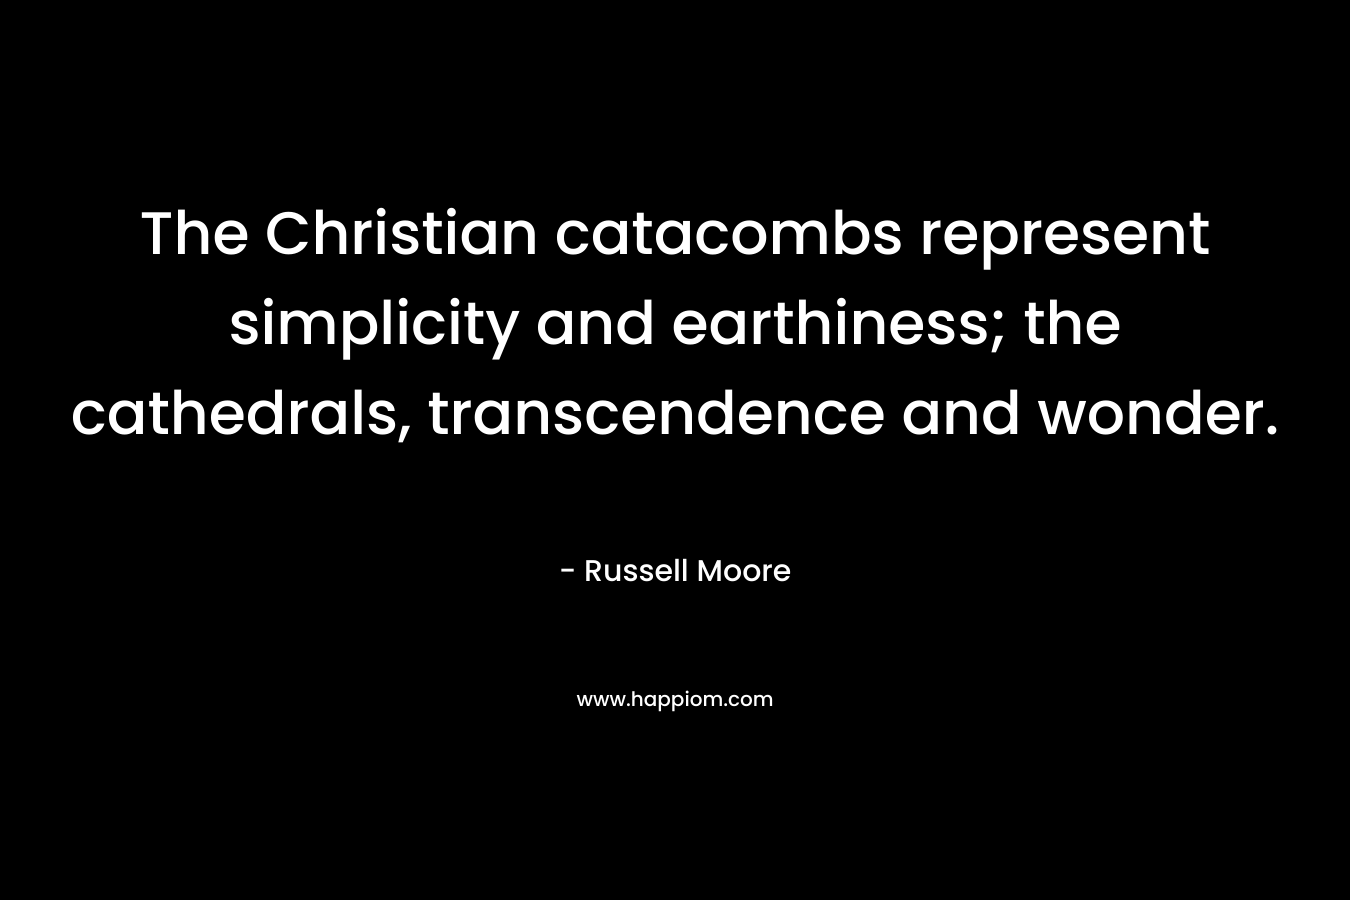 The Christian catacombs represent simplicity and earthiness; the cathedrals, transcendence and wonder. – Russell Moore